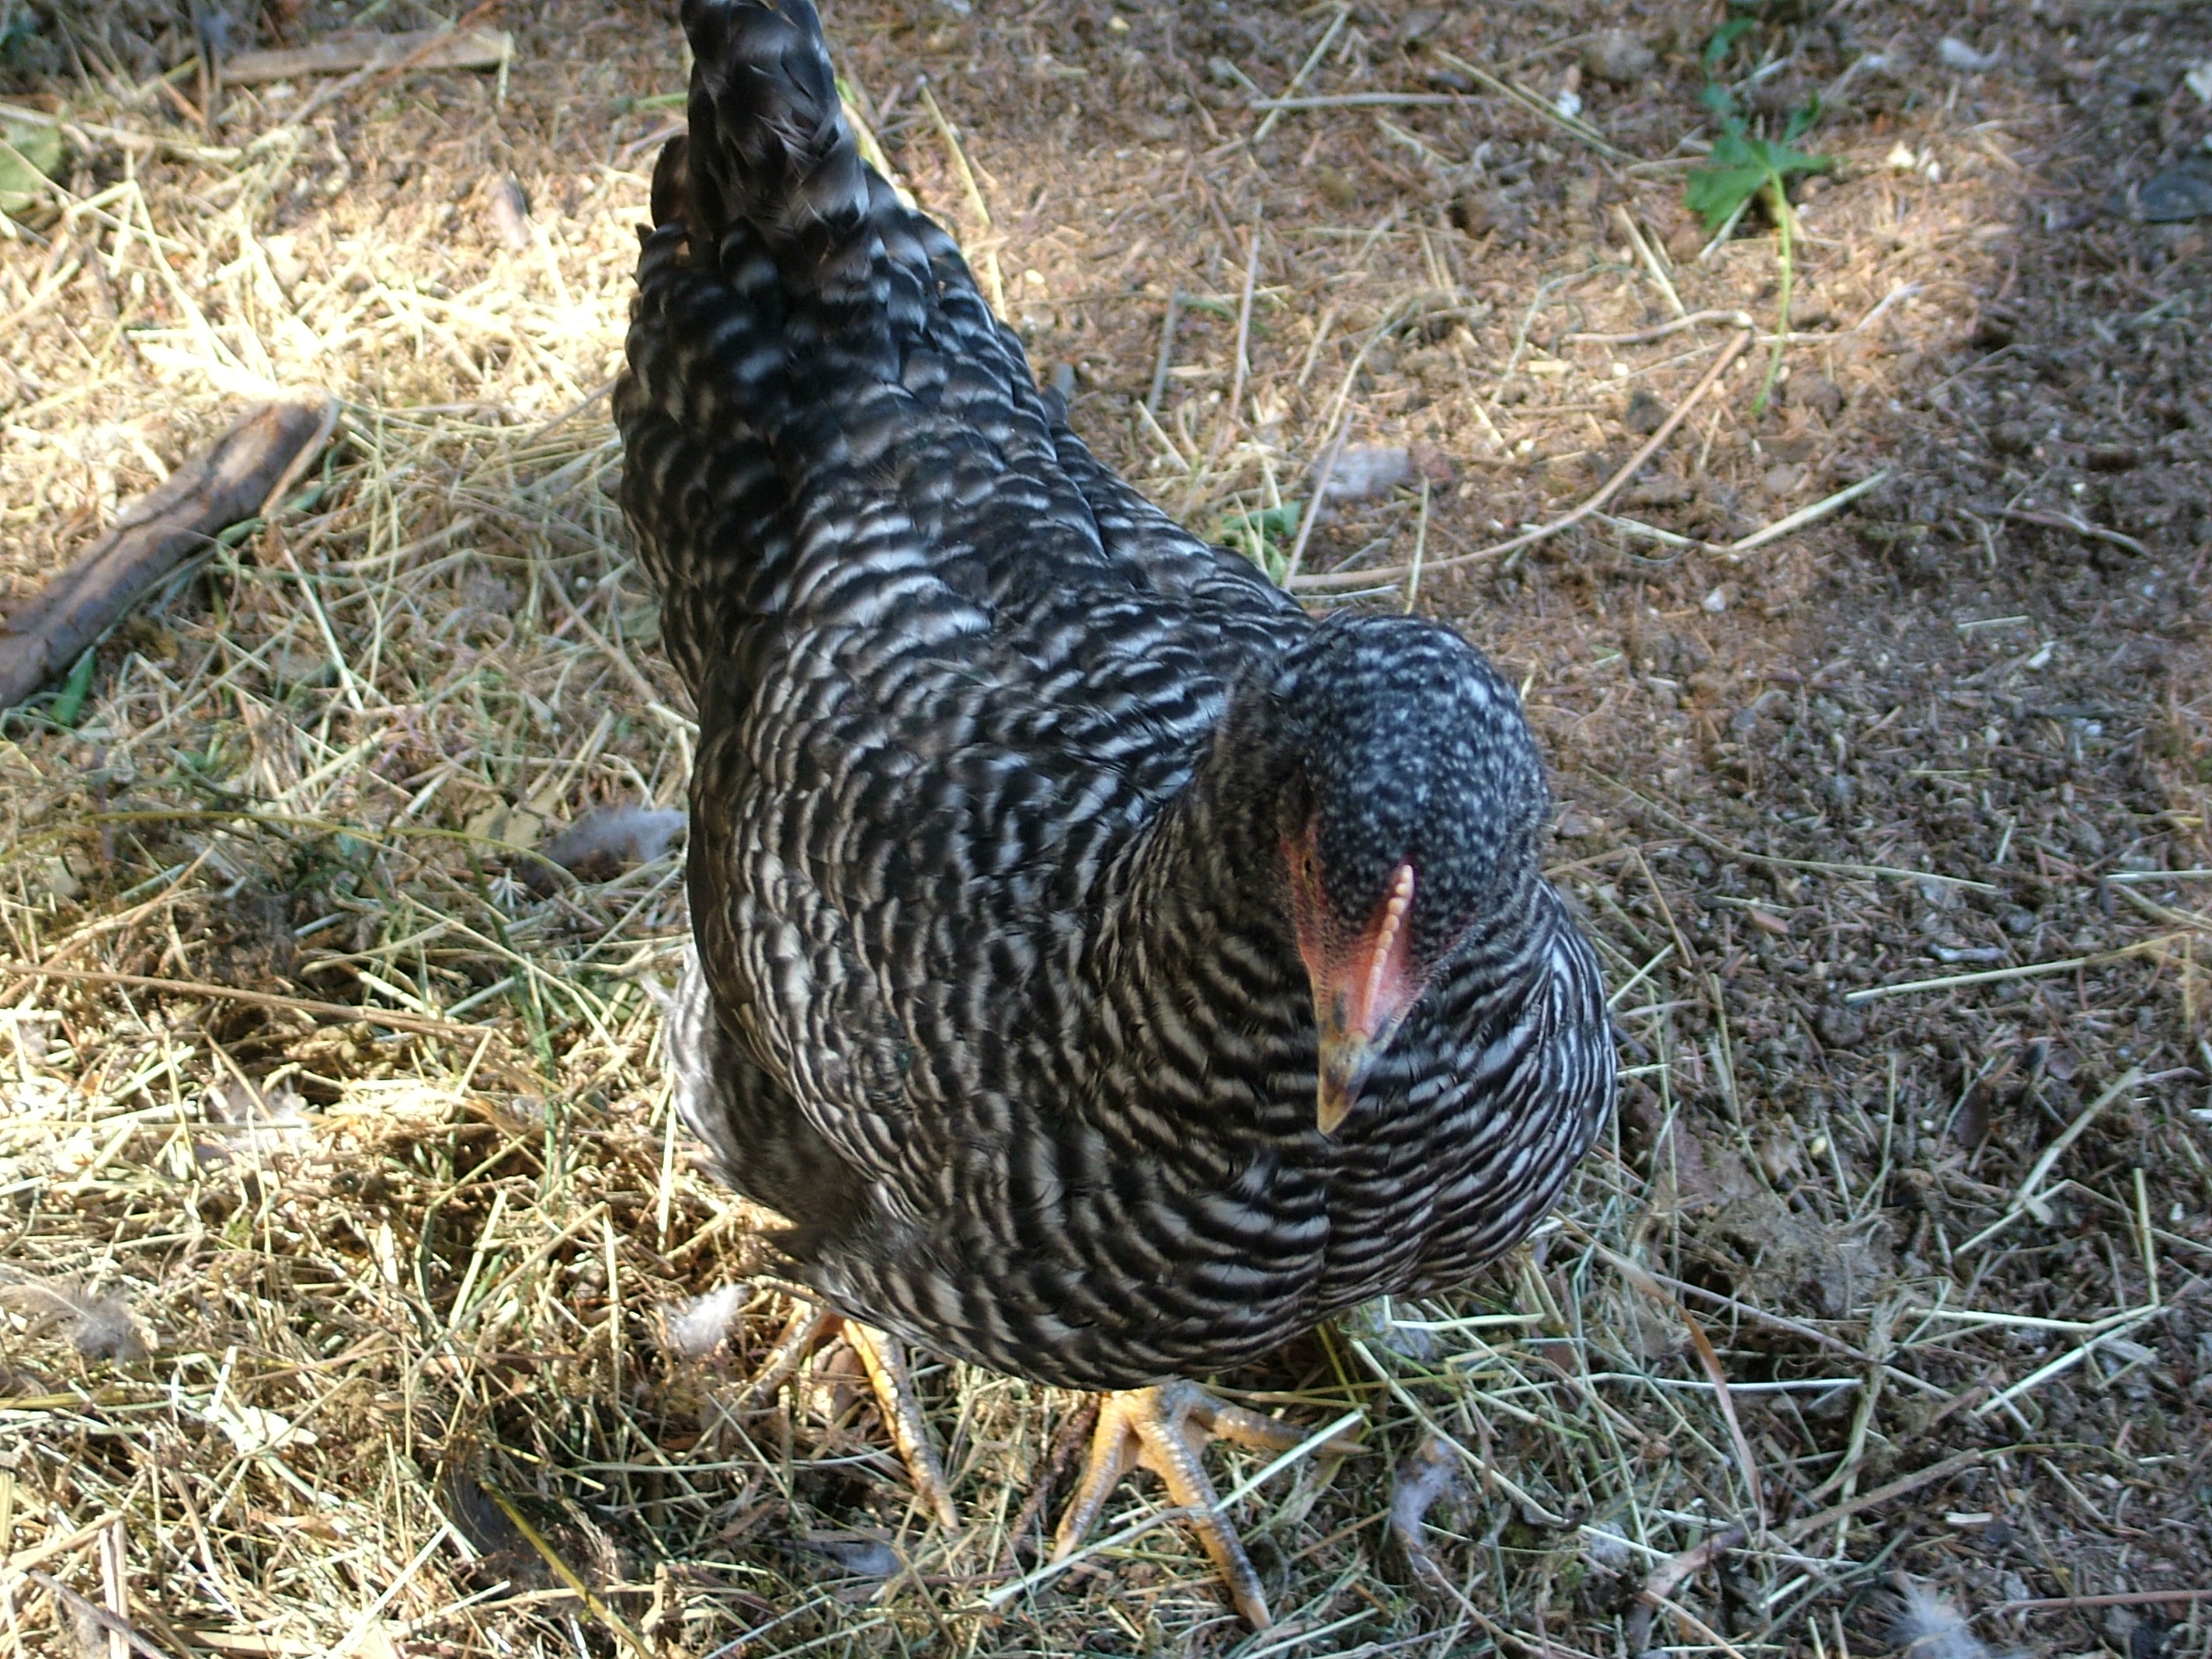 Roxie our Plymouth Barred Rock is a bit on the aggressive side when it comes to eating from my hand and I have to watch out for my fingers.